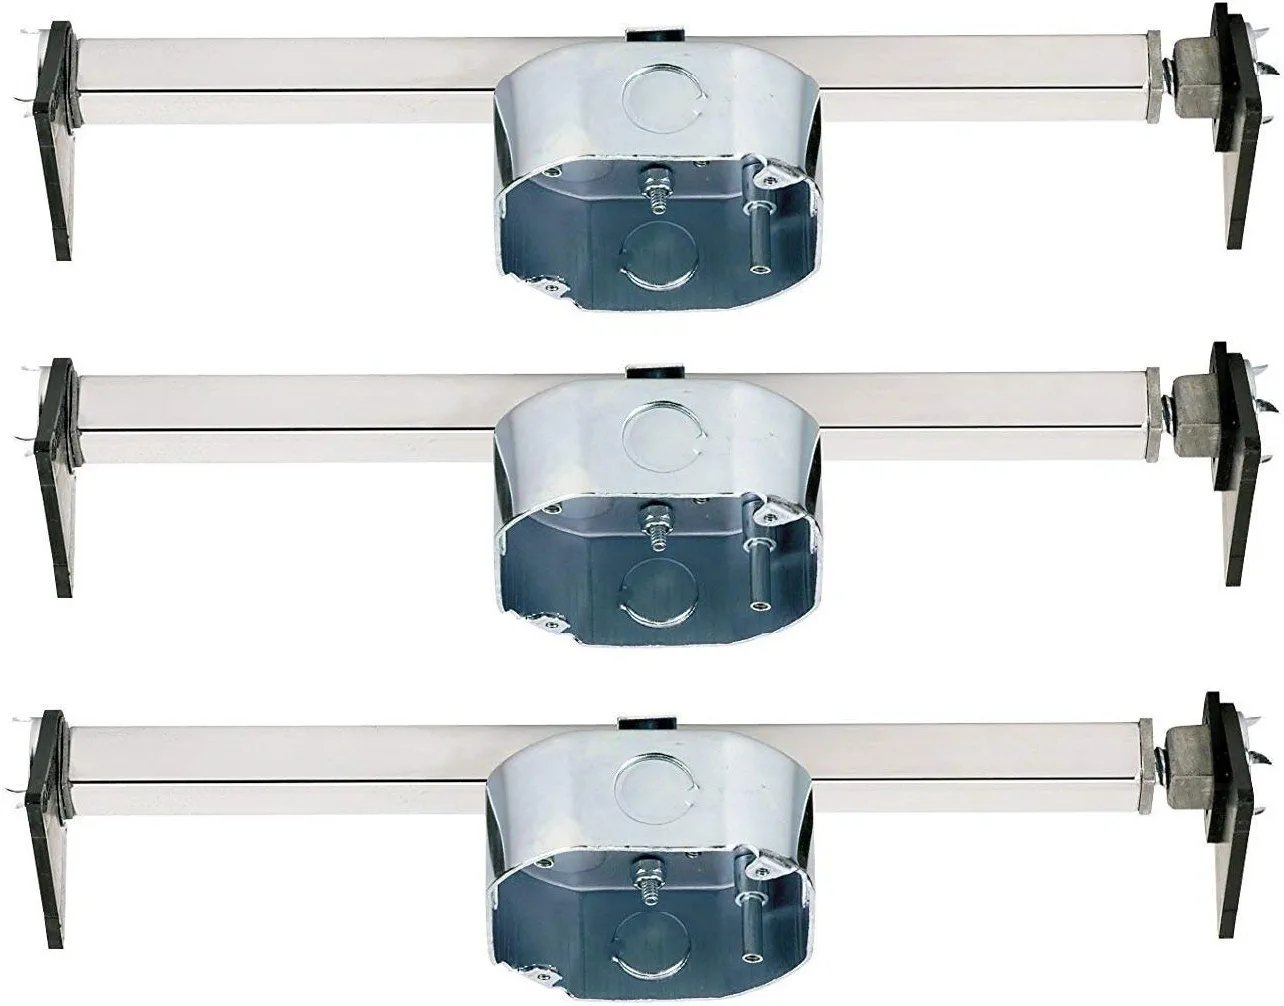 Ciata Ceiling Fan Mounting Bracket, Heavy Duty Metal Mounting Saf-T-Brace with Locking Teeth, 3 Teeth for Lock into Joist, Twist and Lock with 1-1/2 Inch Ceiling Fan Box Mount, Light Electrical Box - 3 Pack